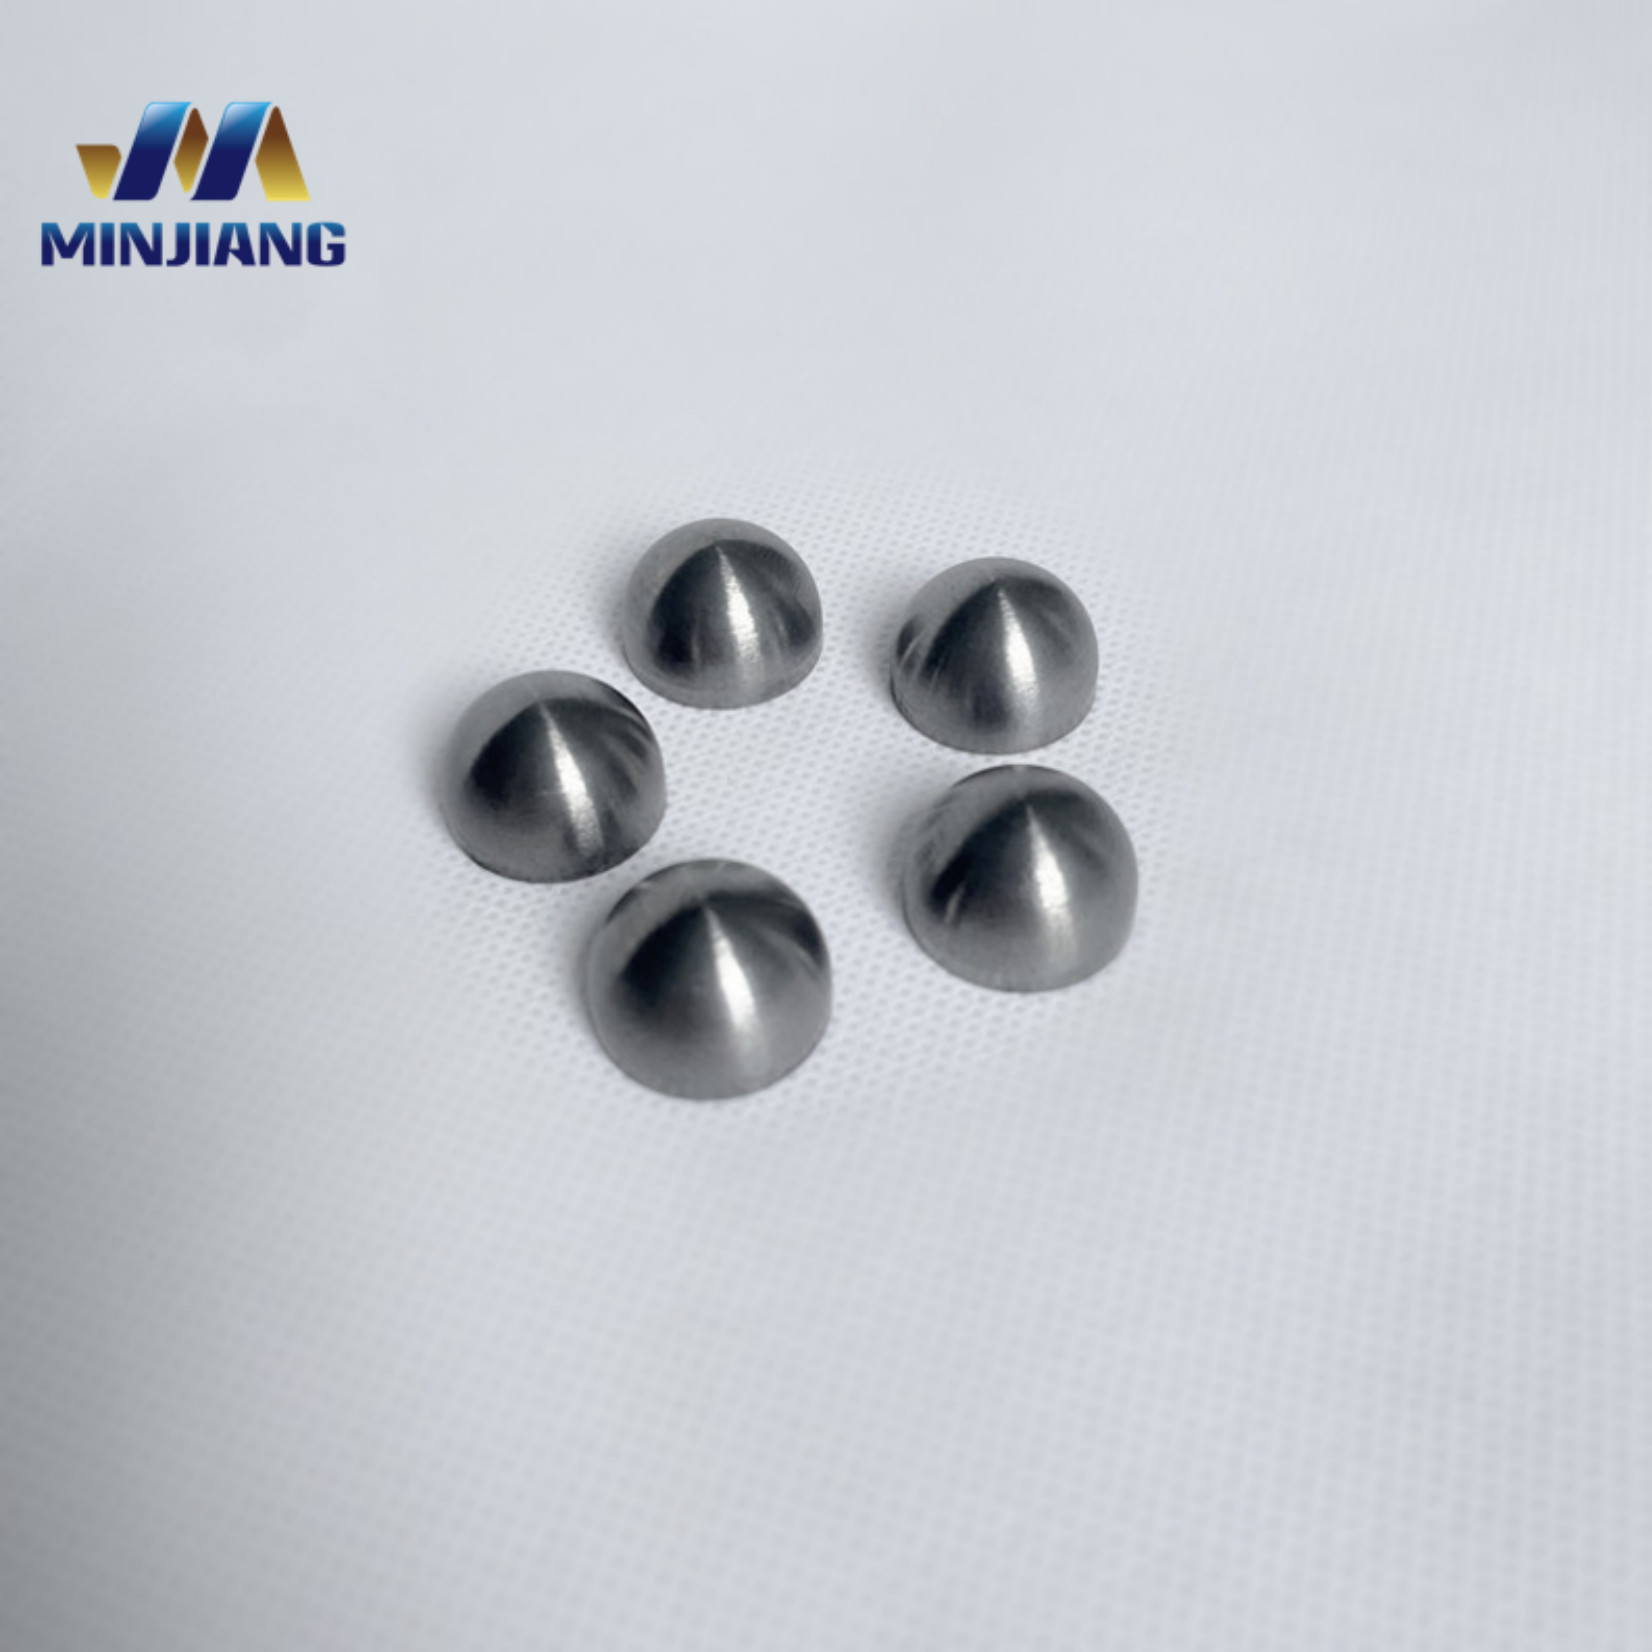 China Industrial Precision Engineered Tungsten Carbide Cutting Tools factory